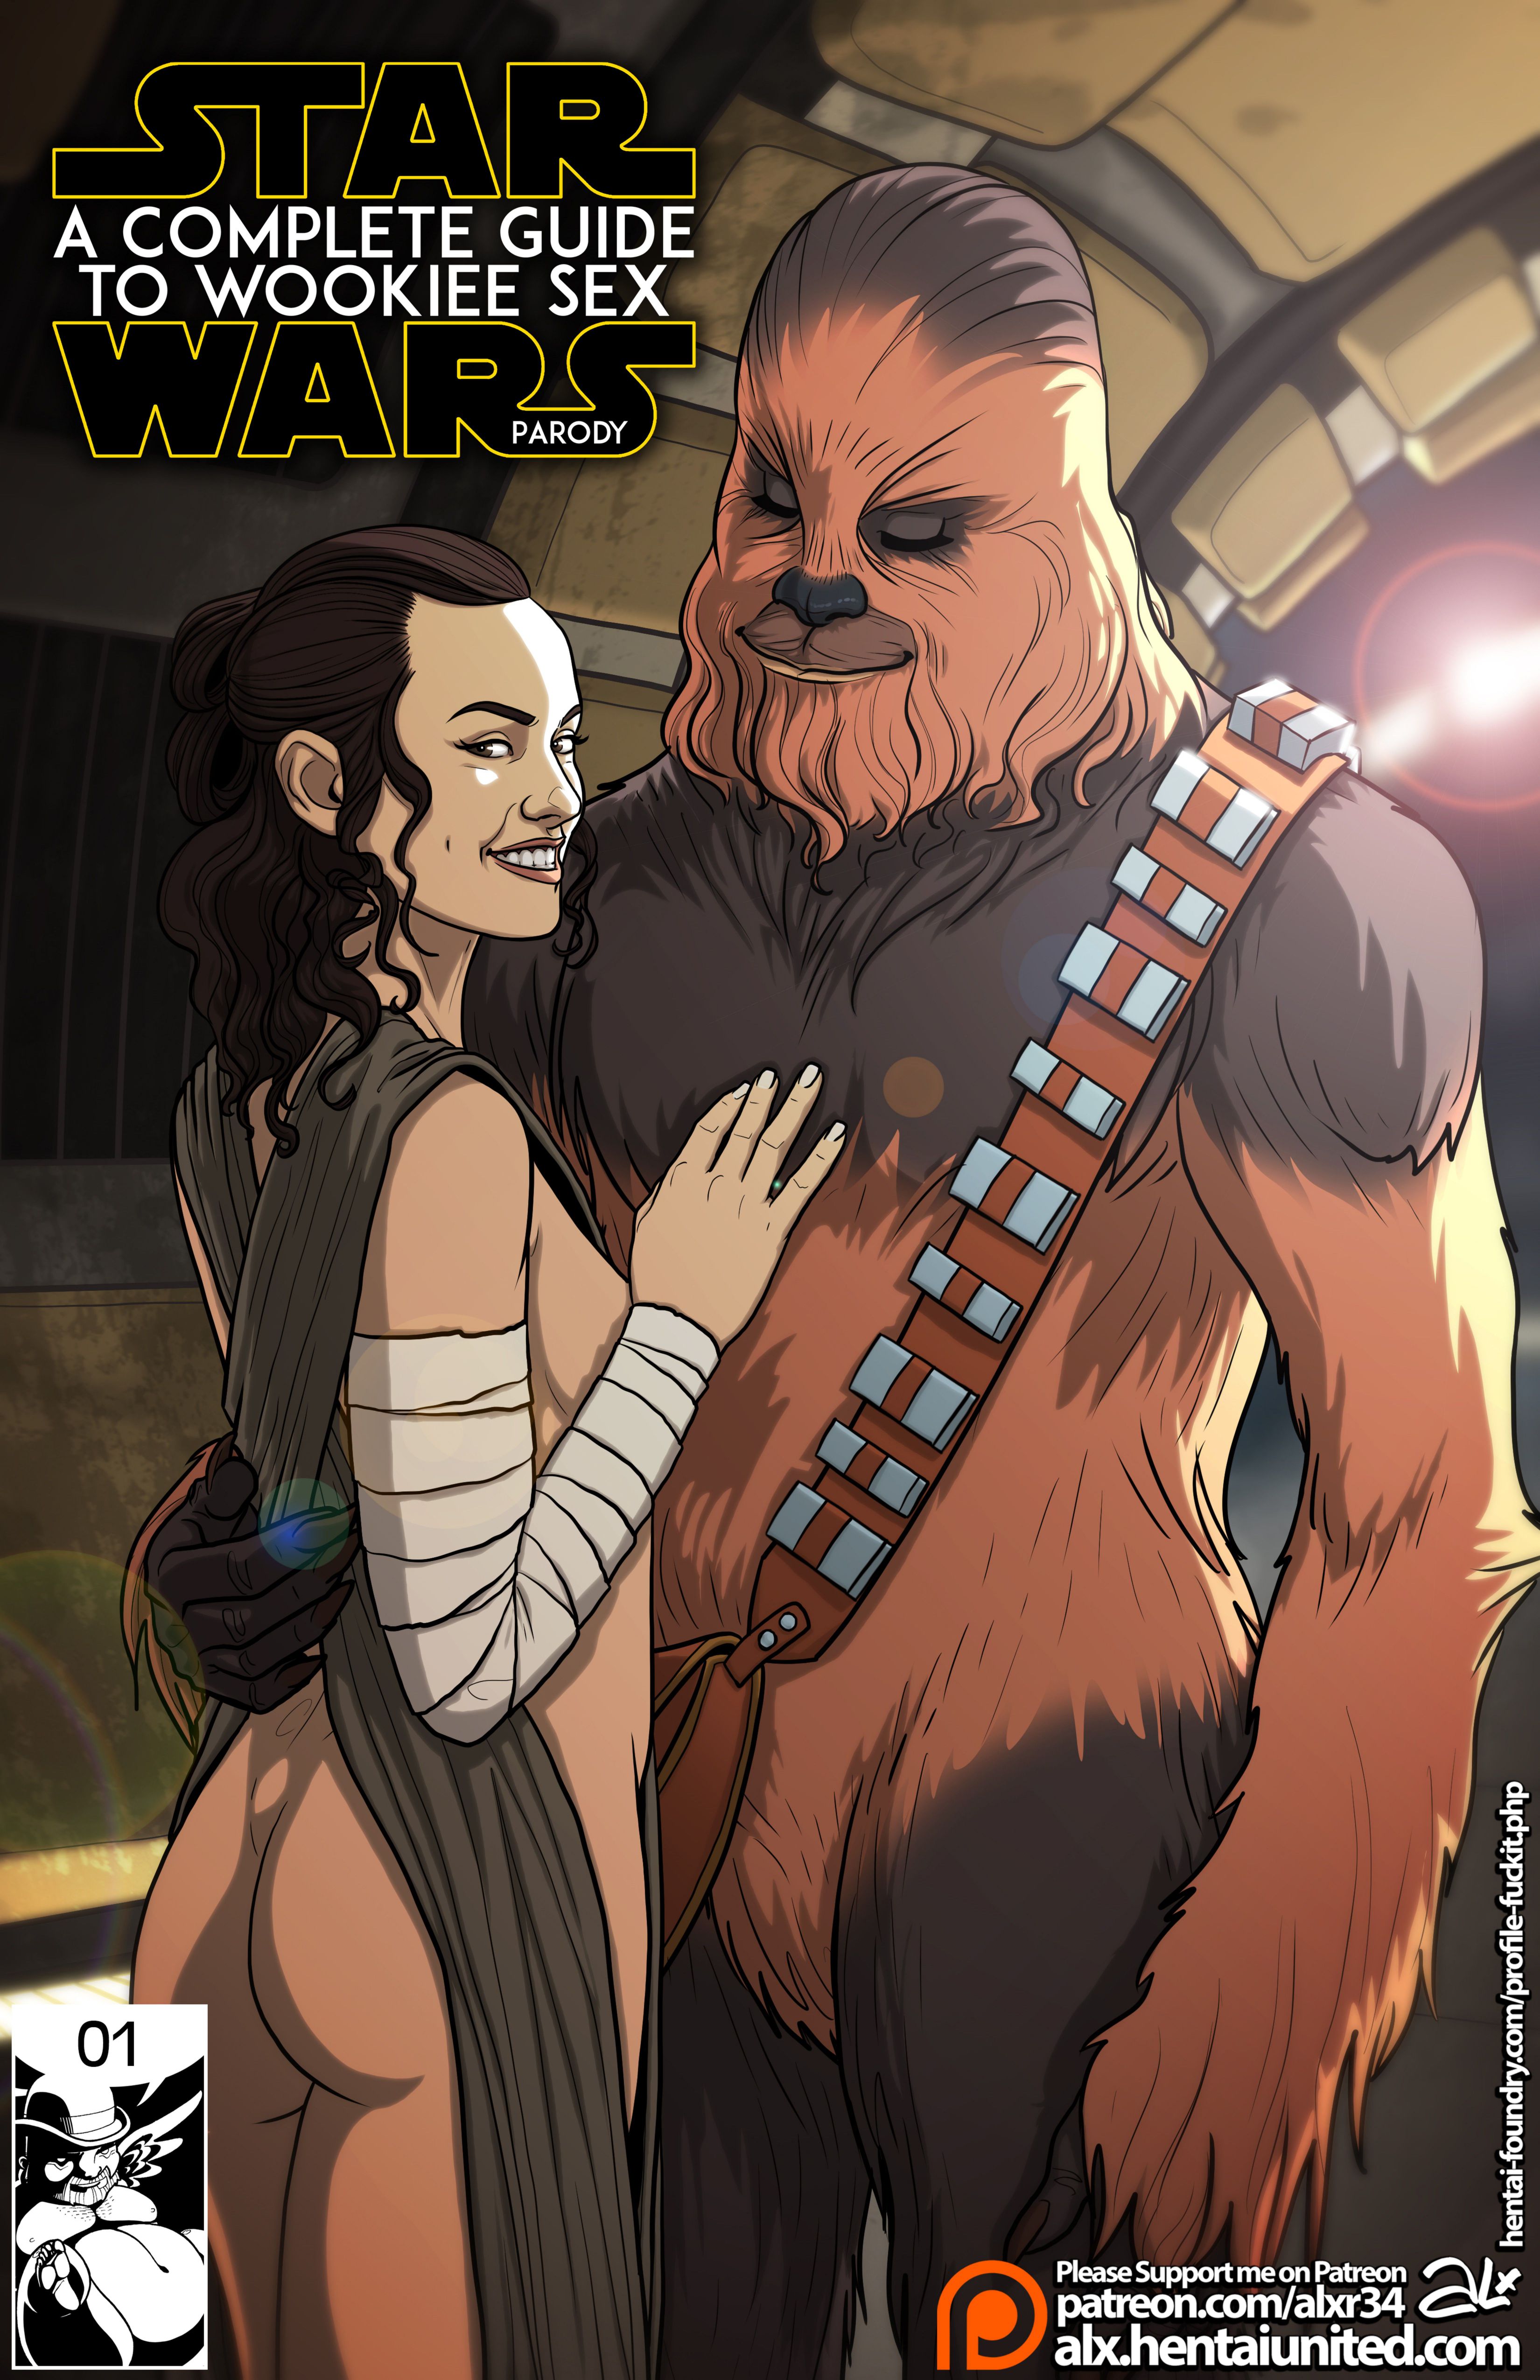 Porn Star Wars Cartoon - A Complete Guide To Wookie Sex (Star Wars) [Alxr34] - 1 . A Complete Guide  To Wookie Sex - Chapter 1 (Star Wars) [Alxr34] - AllPornComic